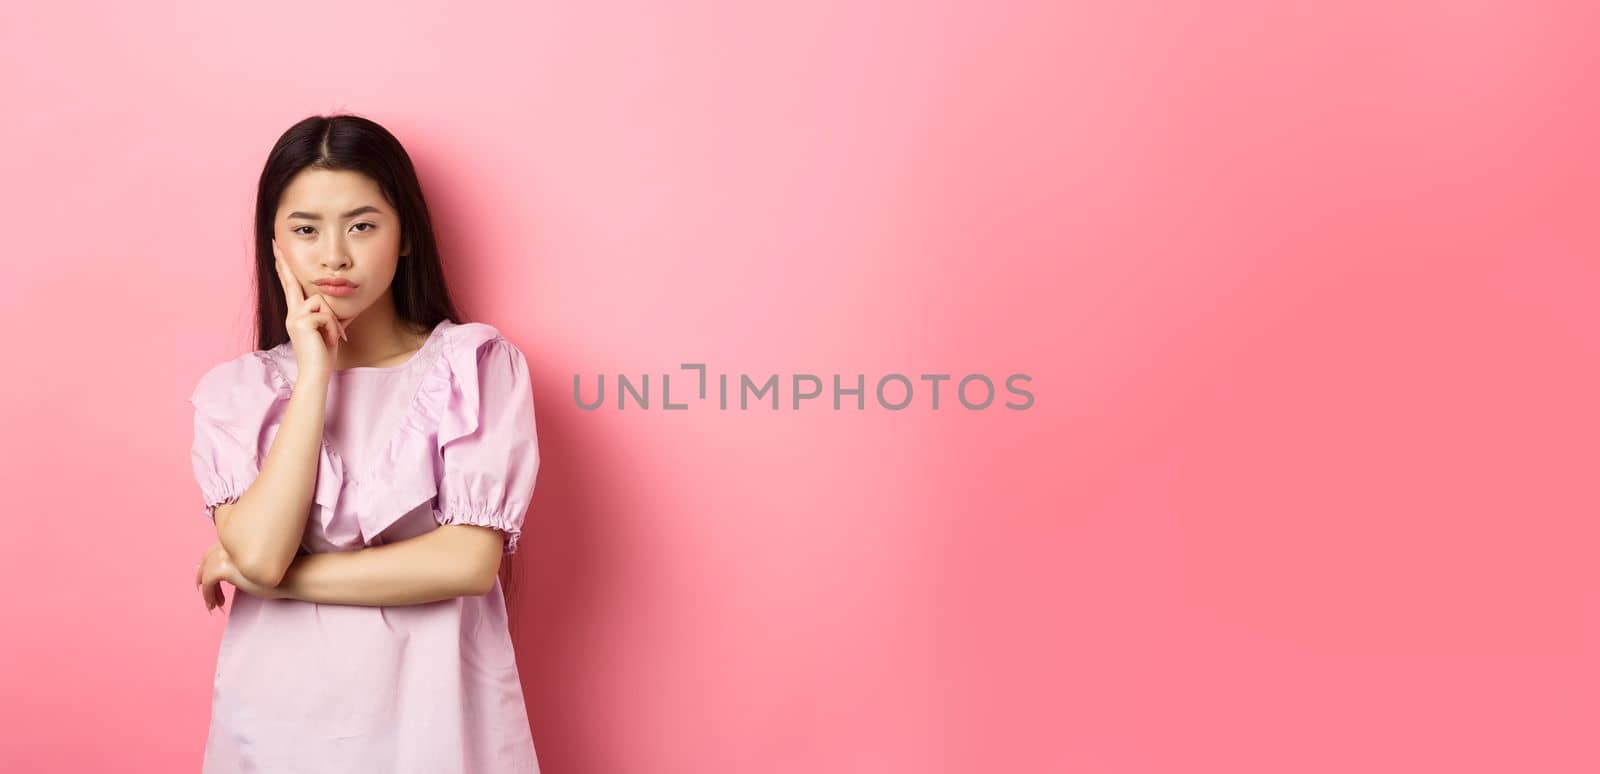 Bored asian teen girl look indifferent at camera, lean face on hand in skeptical pose, standing reluctant against pink background.